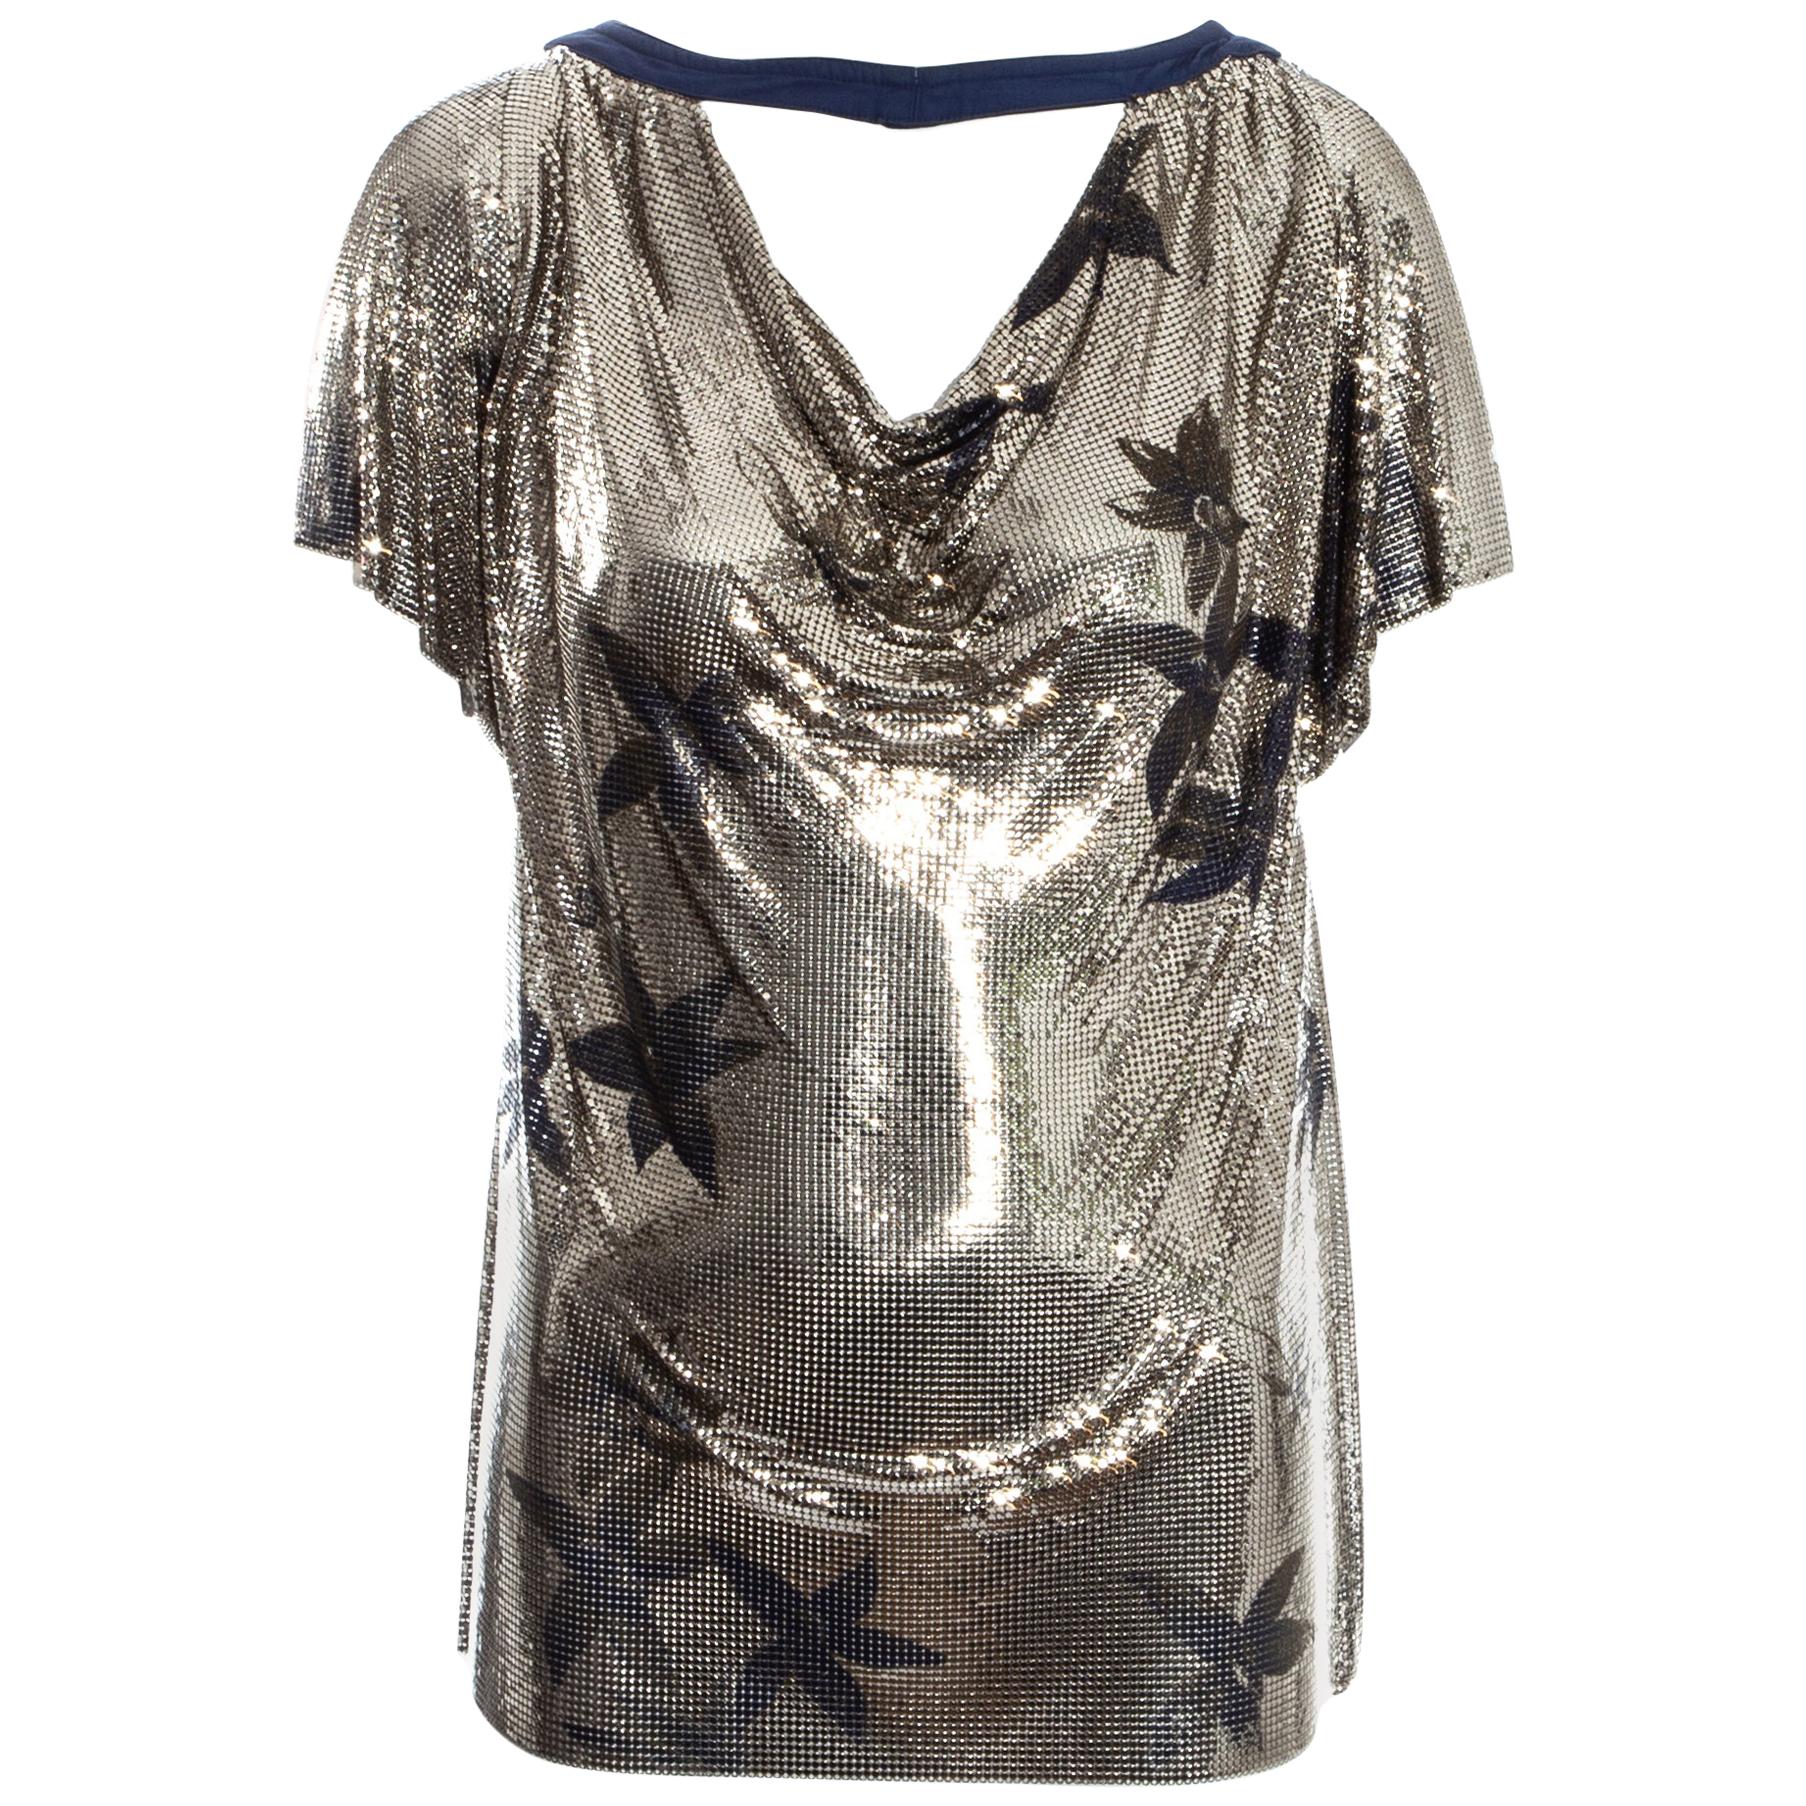 Gianni Versace silver chainmail evening top with floral print, fw 1983